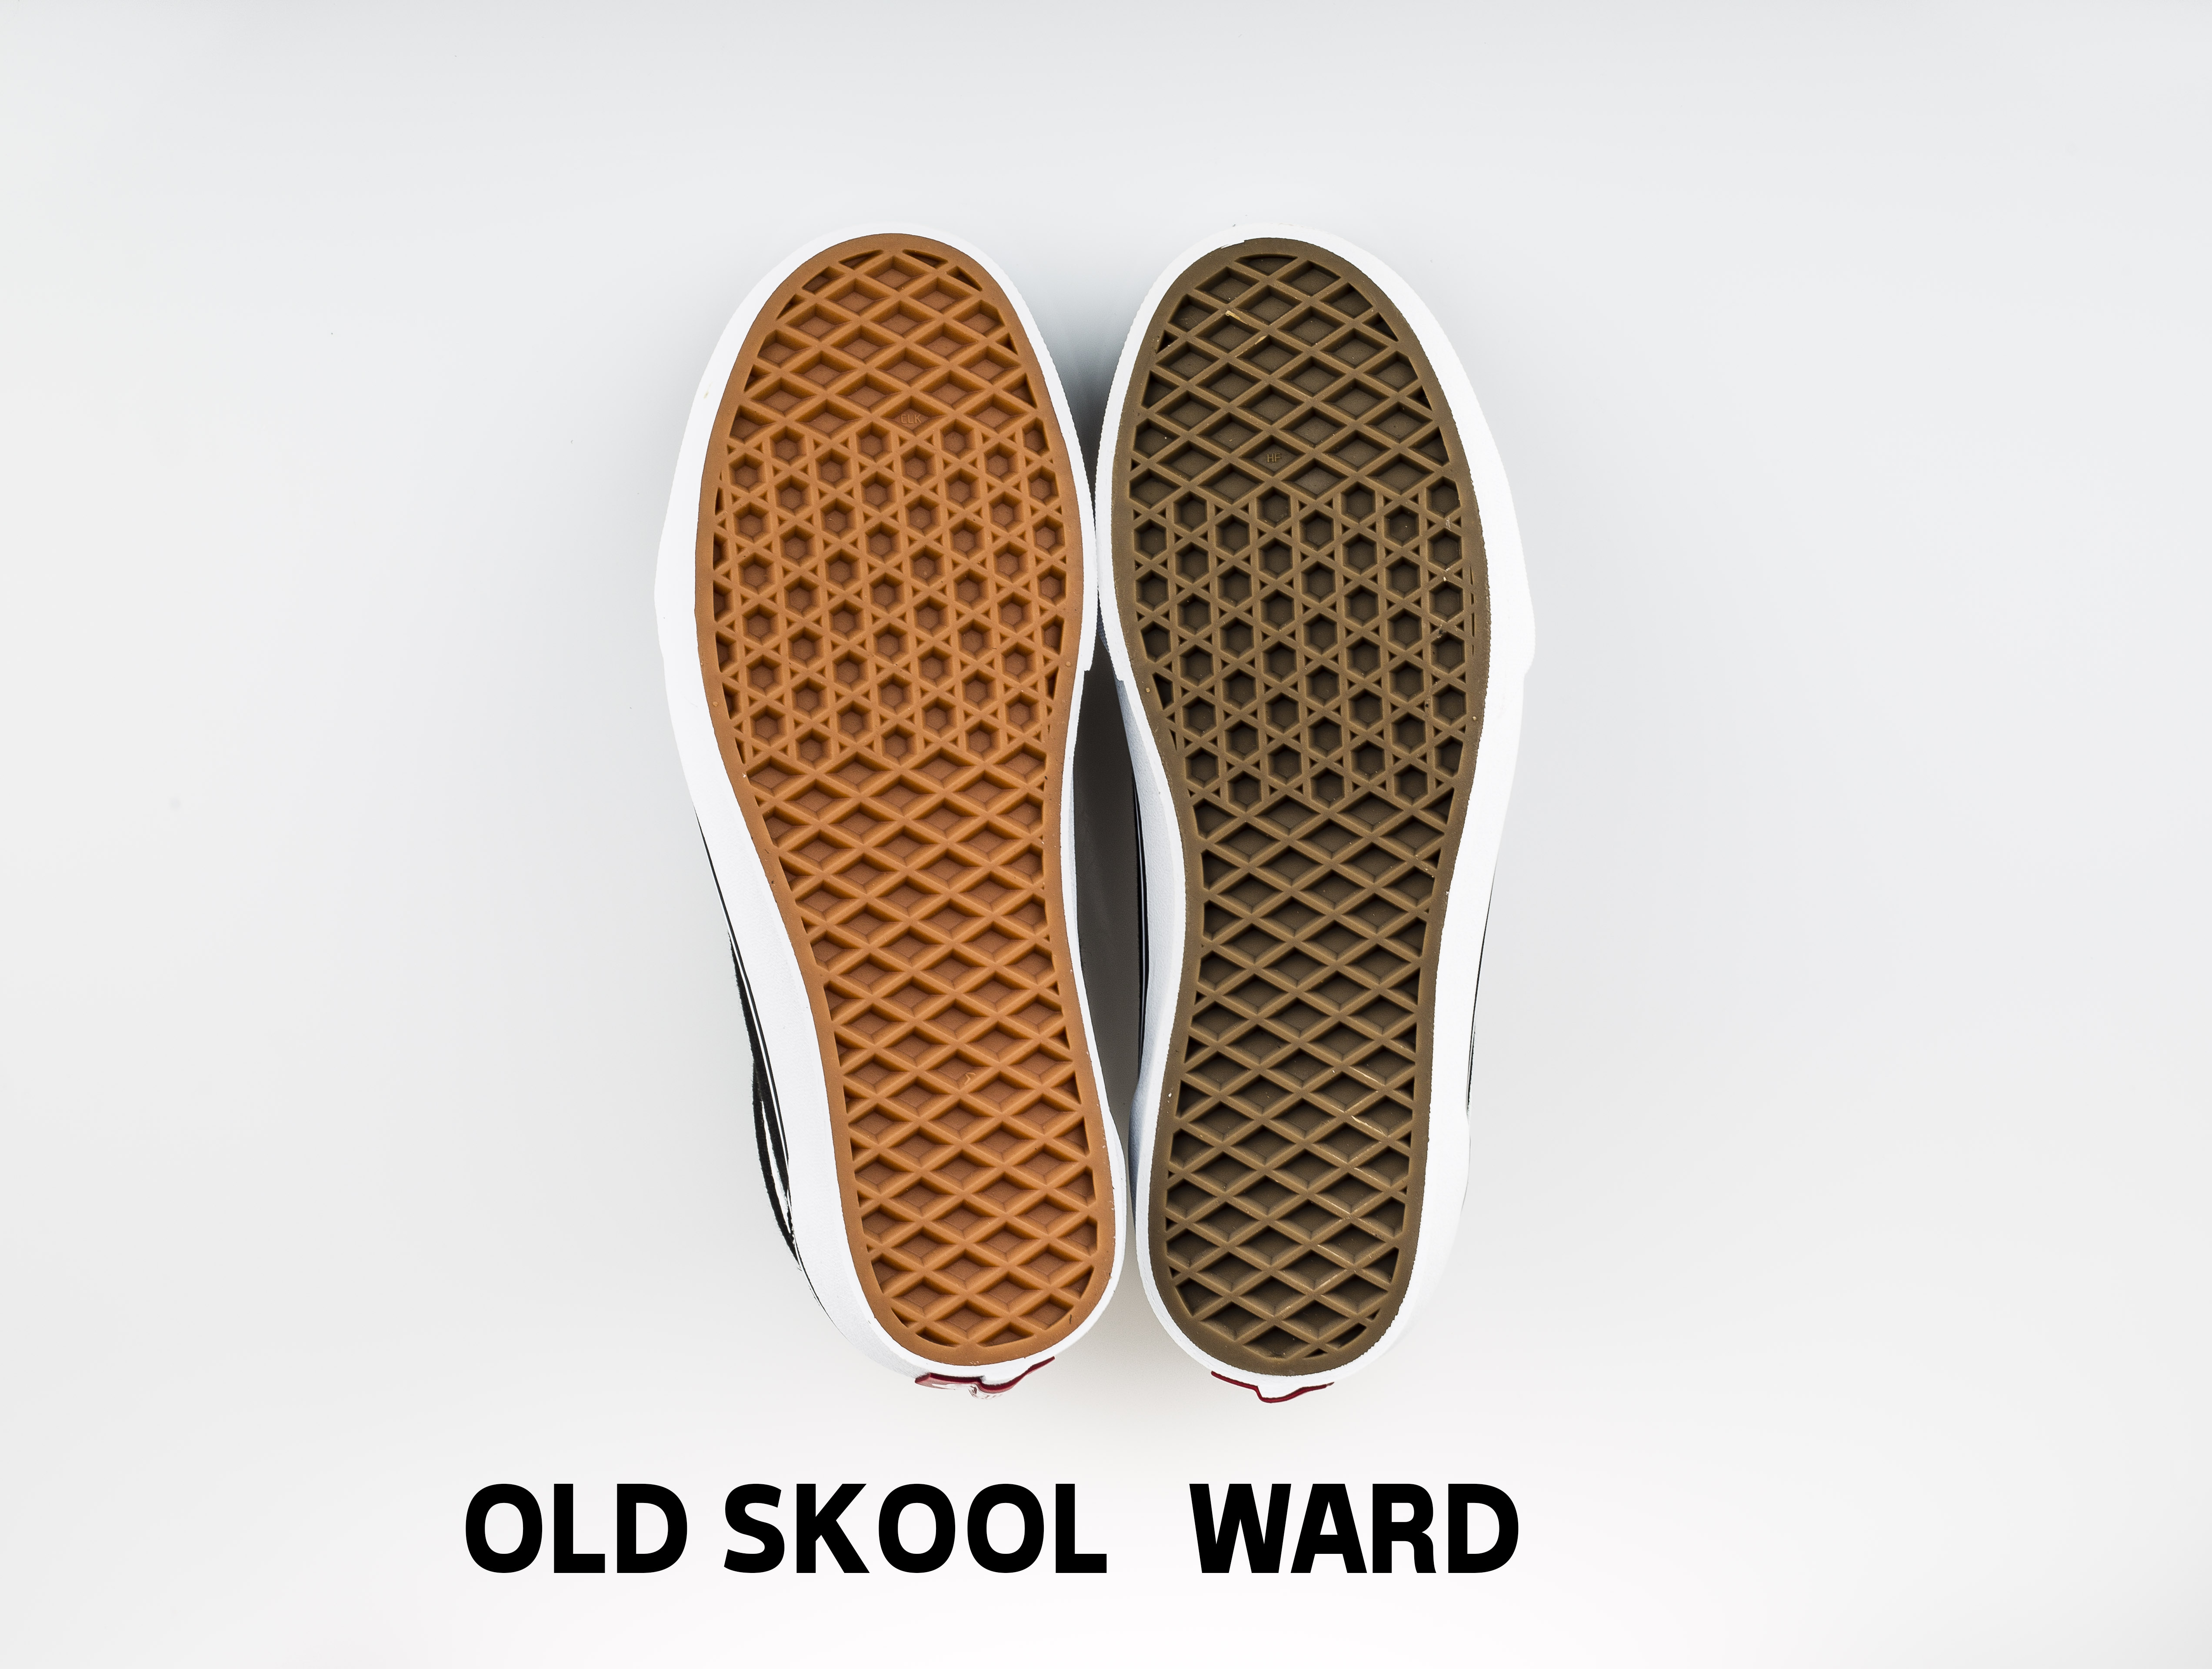 are vans ward and old skool the same